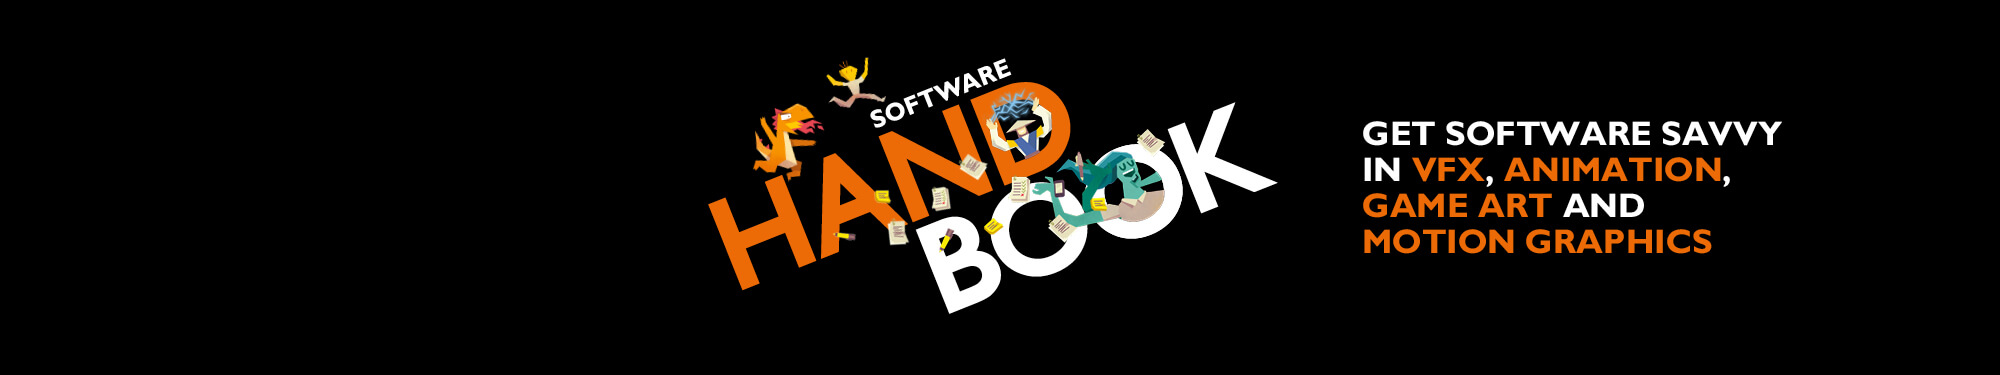 Software Handbook graphic in the centre with avatars 